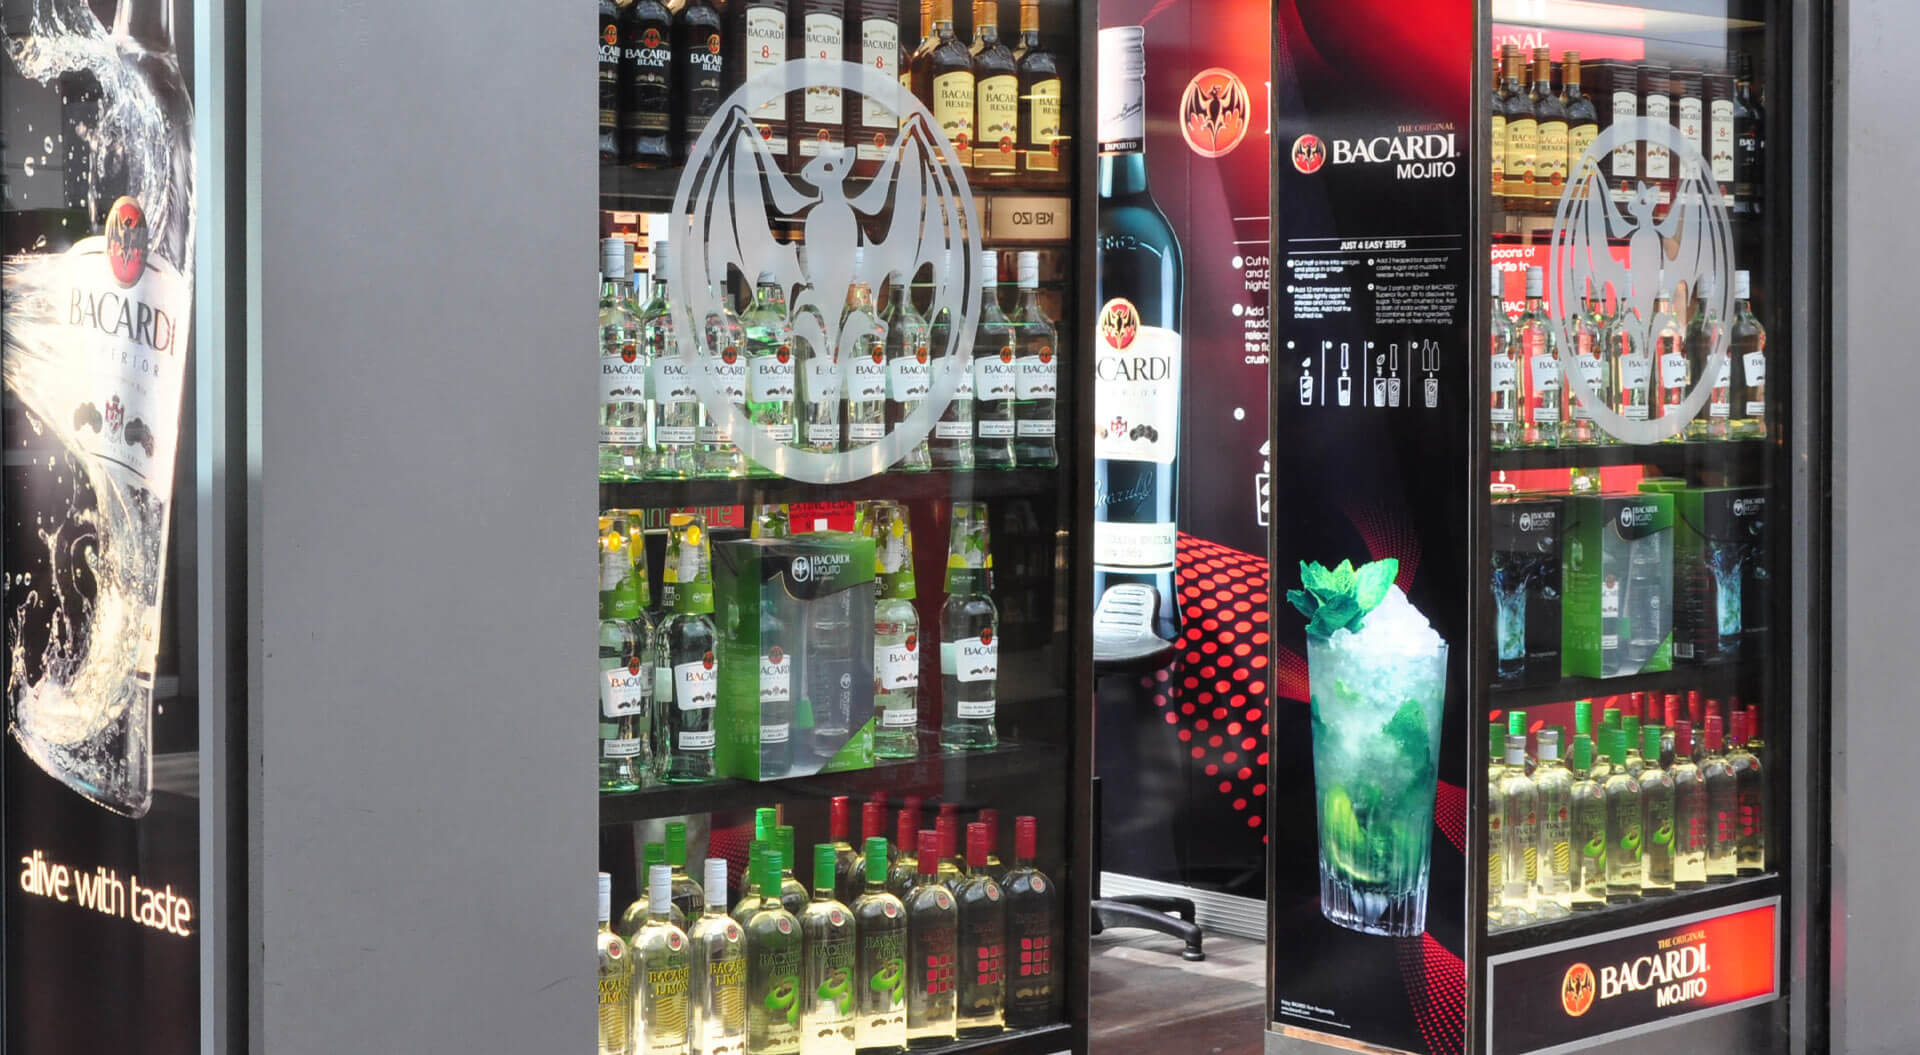 Bacardi Mojito Global Travel Retail, brand activation store entrance design at Charles de Gualle Airport